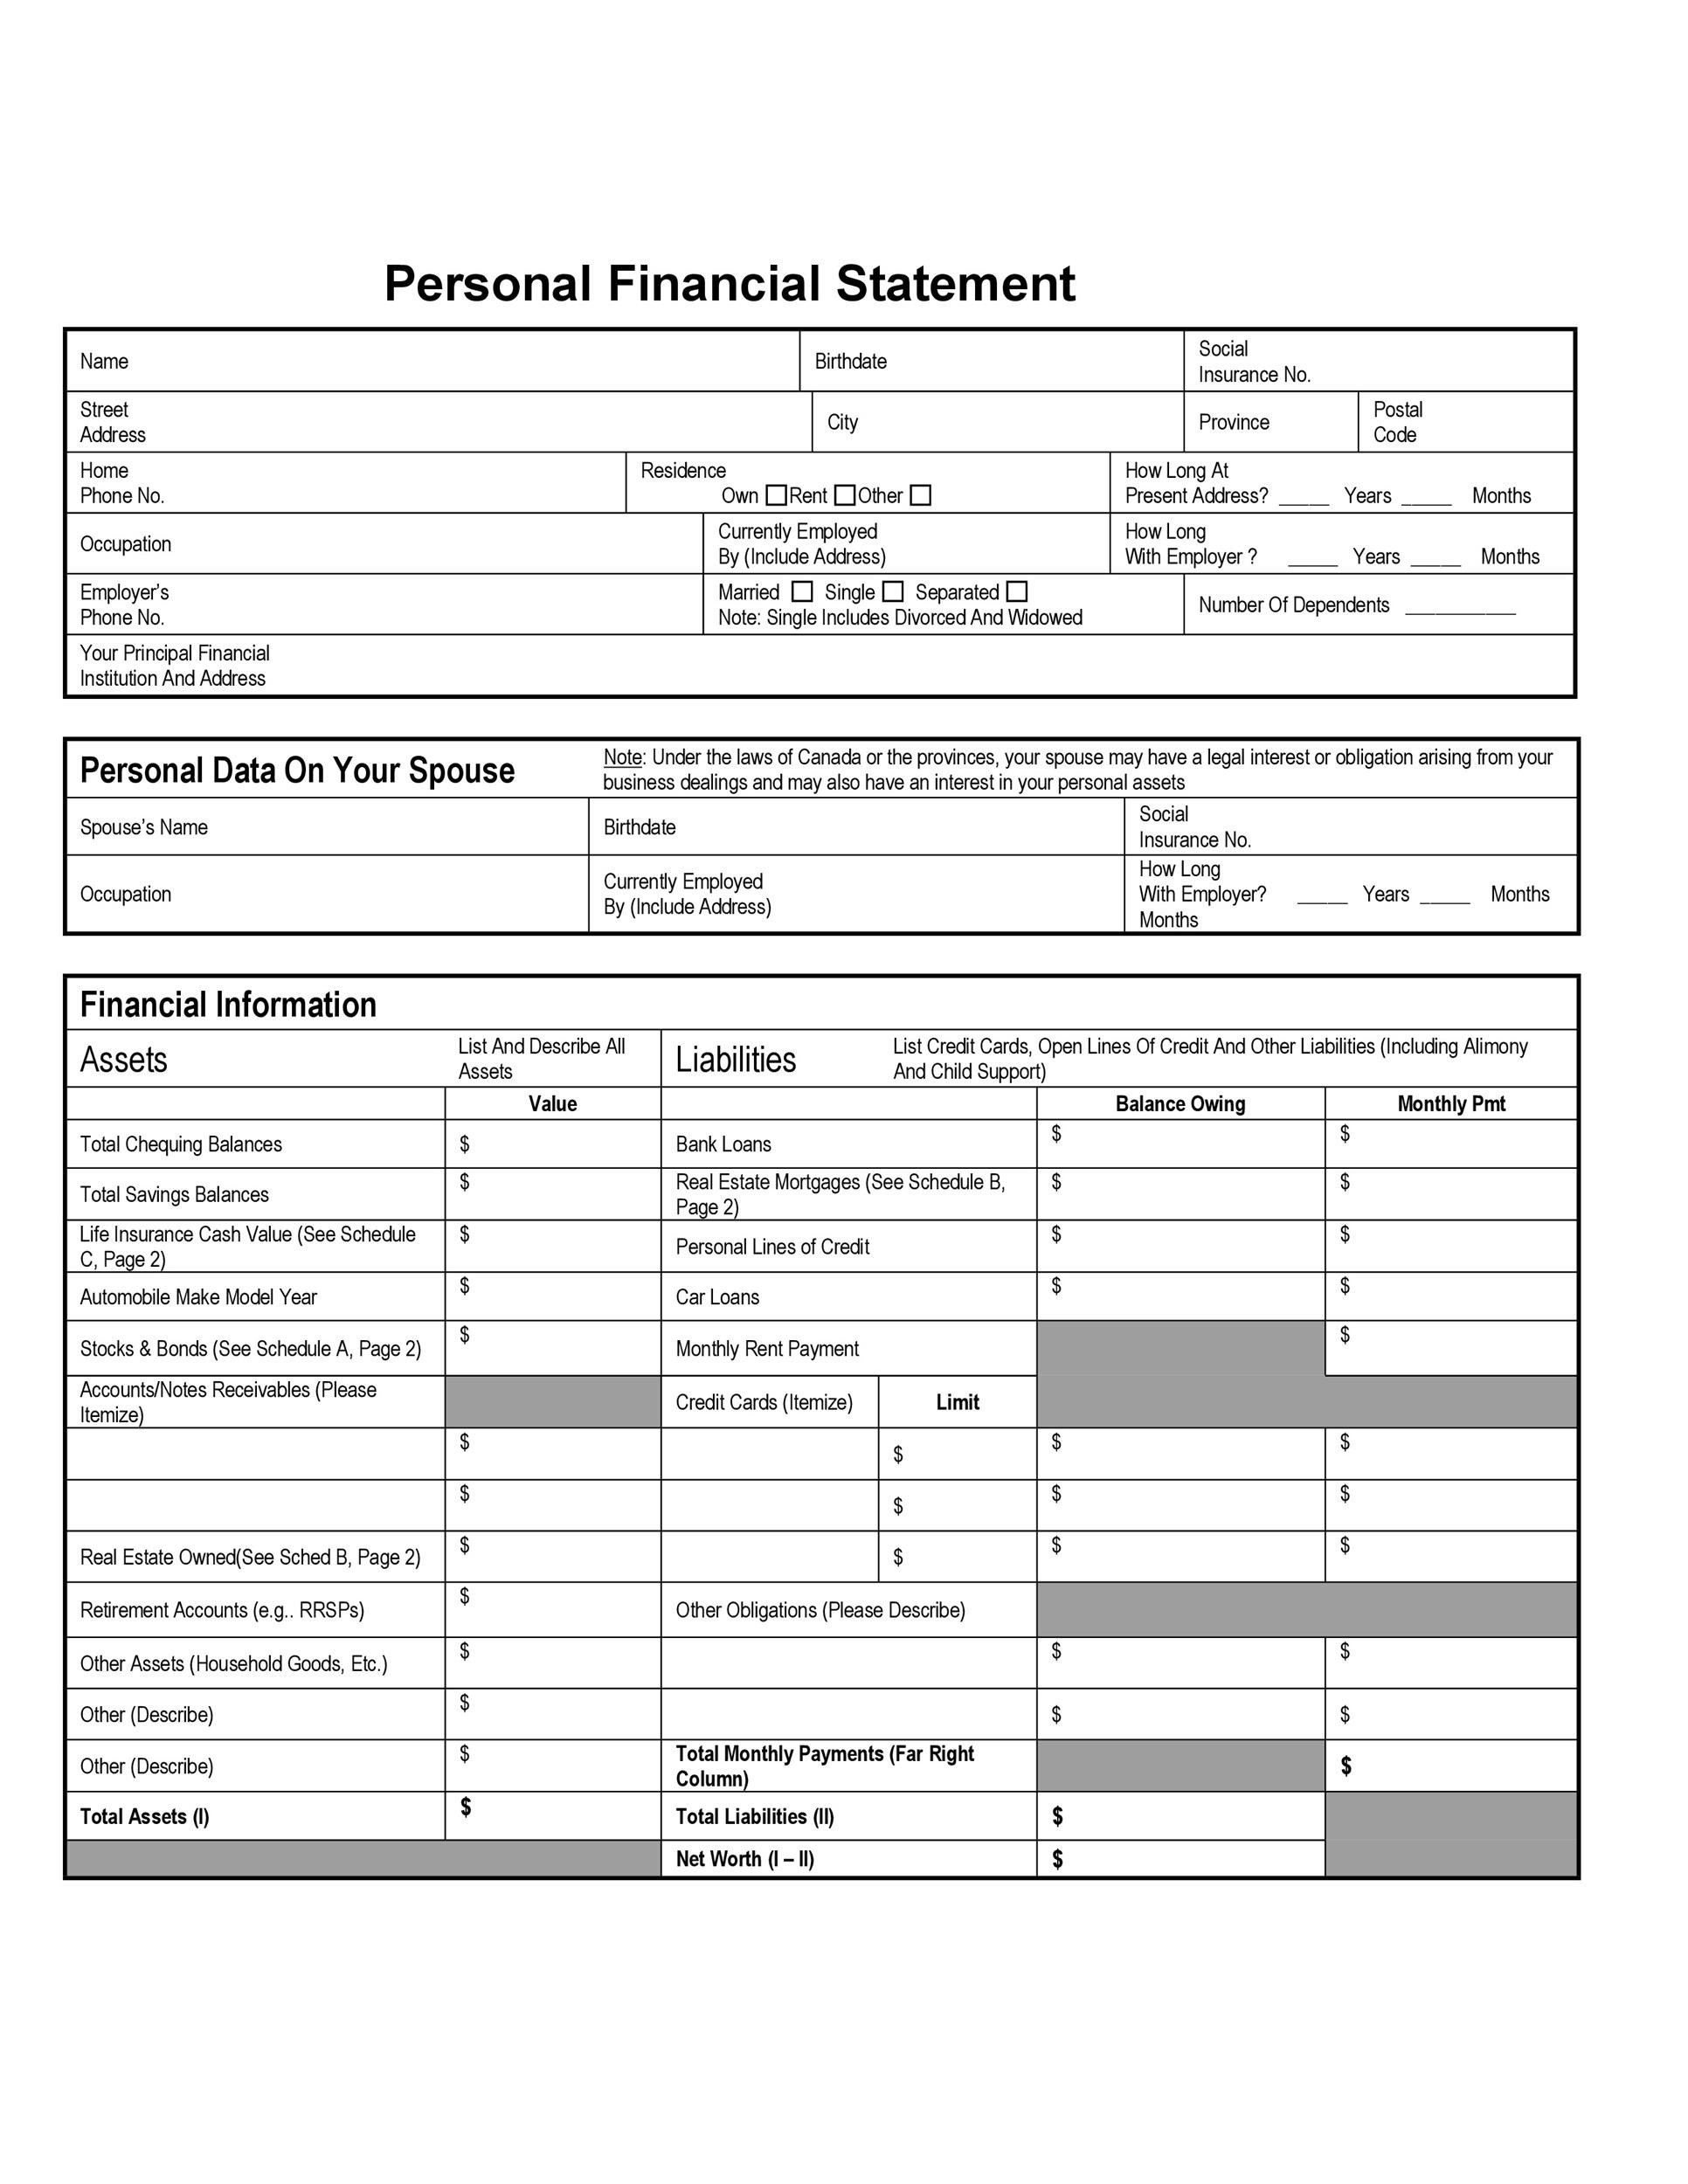 Sample Personal Financial Statement Template Pertaining To Blank Personal Financial Statement Template